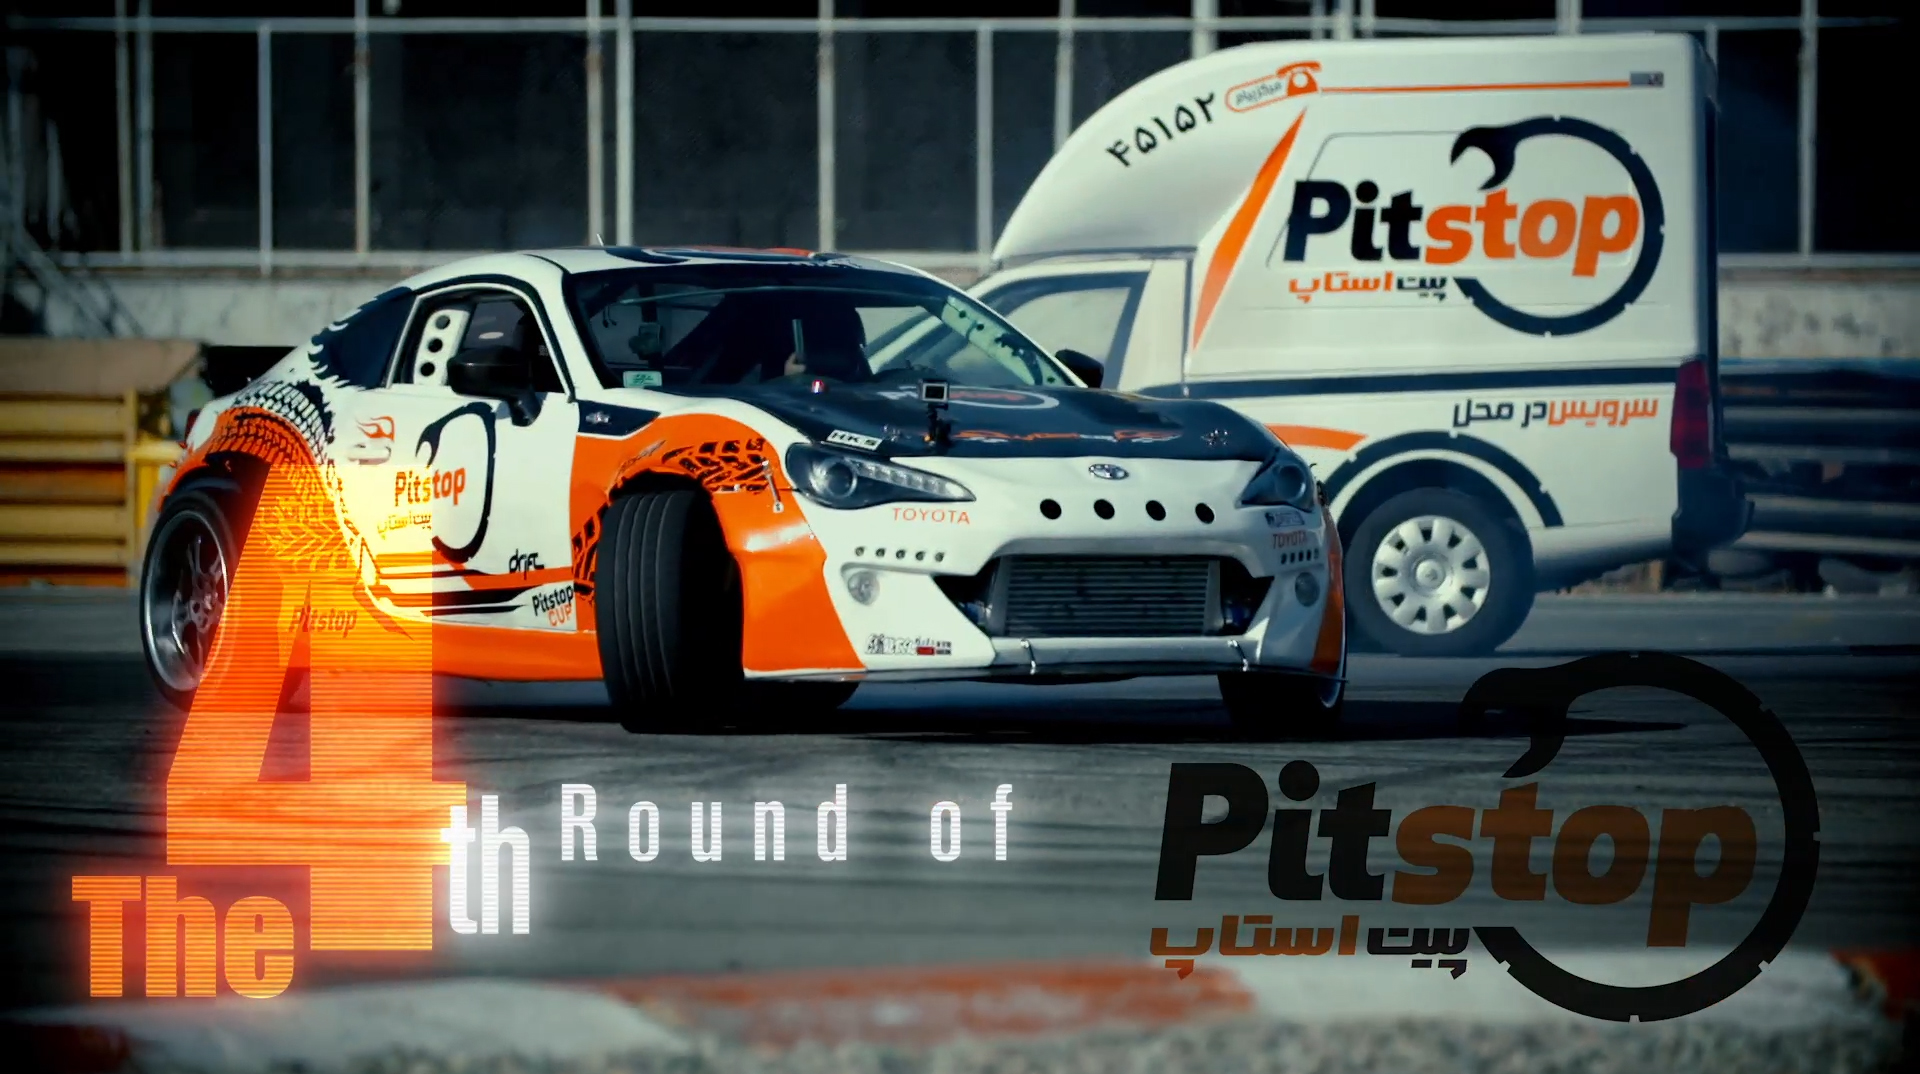 TV commercial of National Drifting championship in Iran, Directed by ARASH BAHMANI - a picture of a white and orange TOYOTA race car